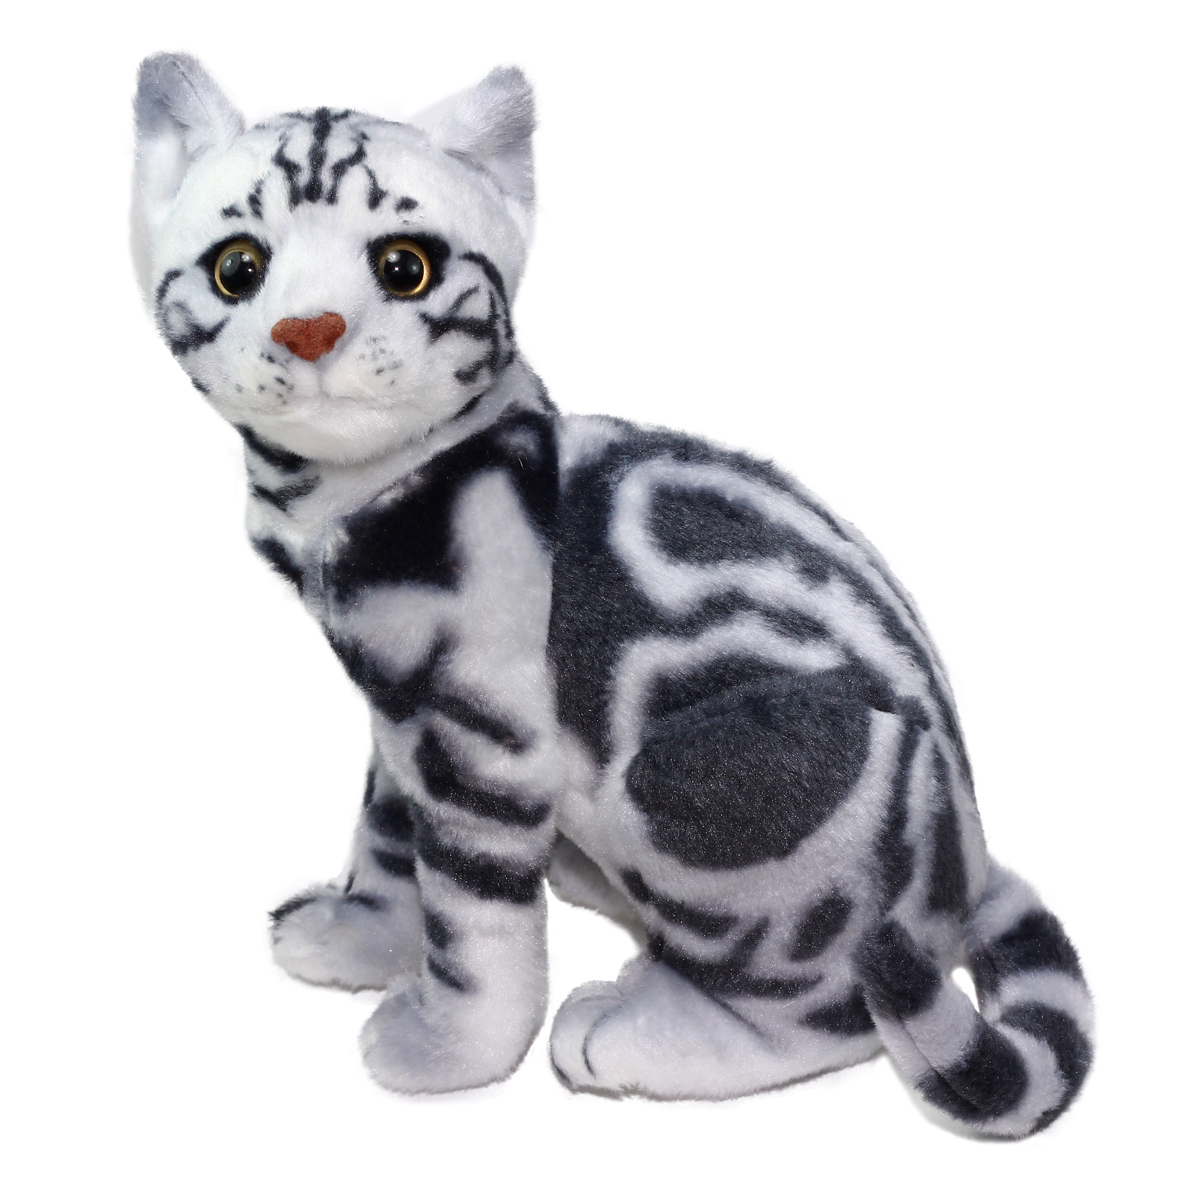 Real Cat Plush Collection Stuffed Animal Toy Grey / Dark Grey Tabby Cat 10 Inches